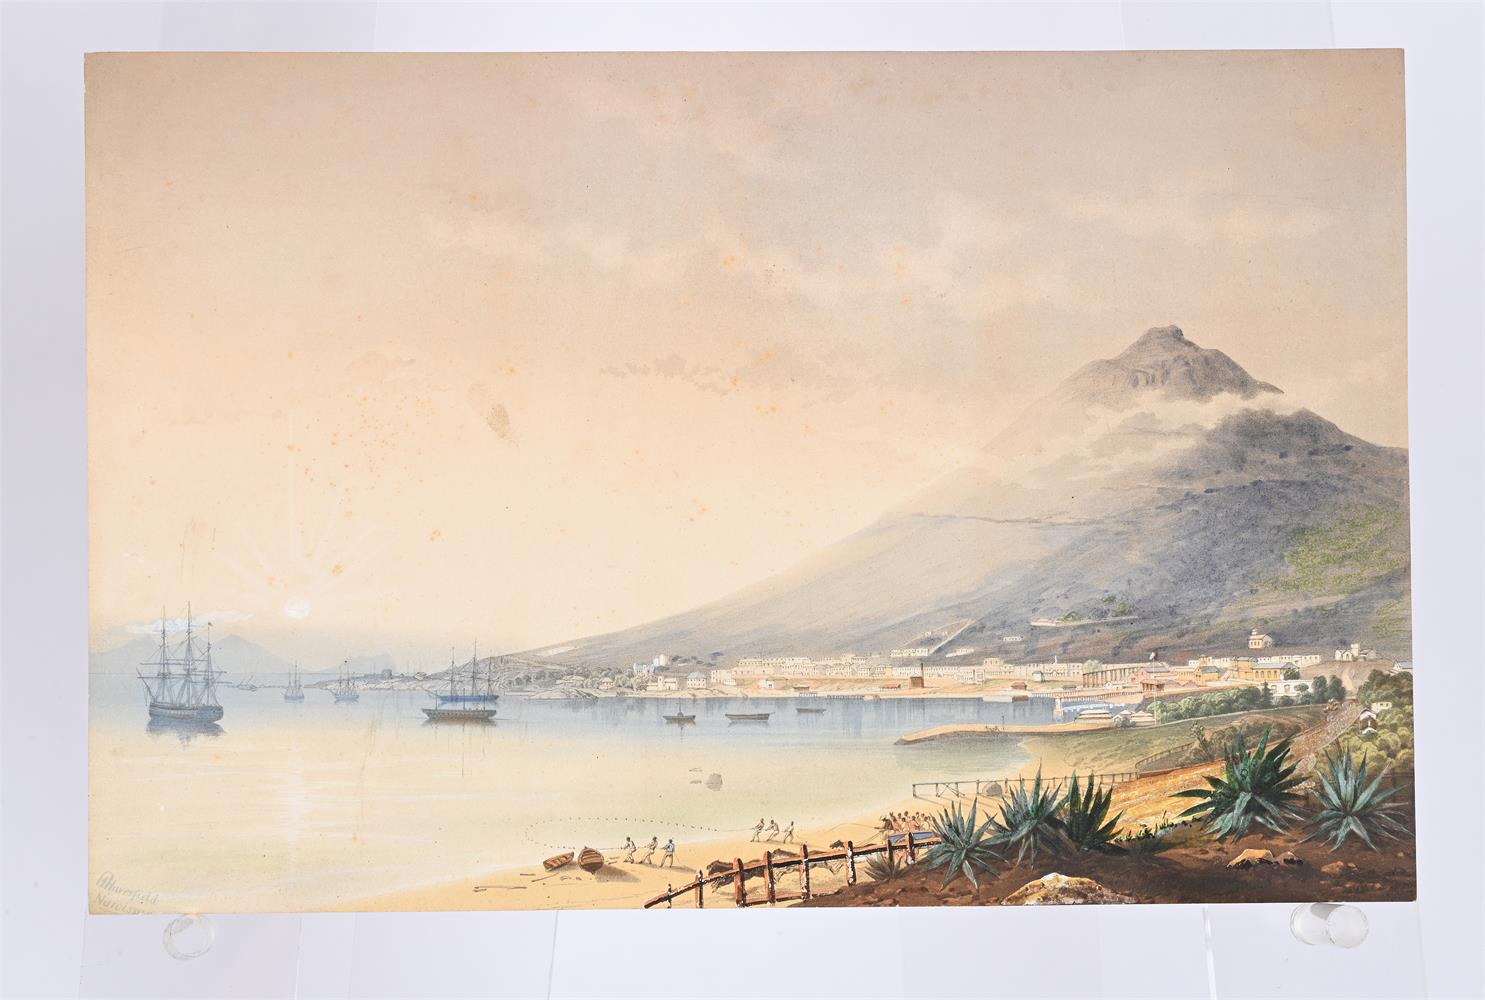 J. T. HAVERFIELD (1825-1855), VIEW OF A LATIN AMERICAN COASTAL TOWN BY A MOUNTAIN RANGE - Image 2 of 3